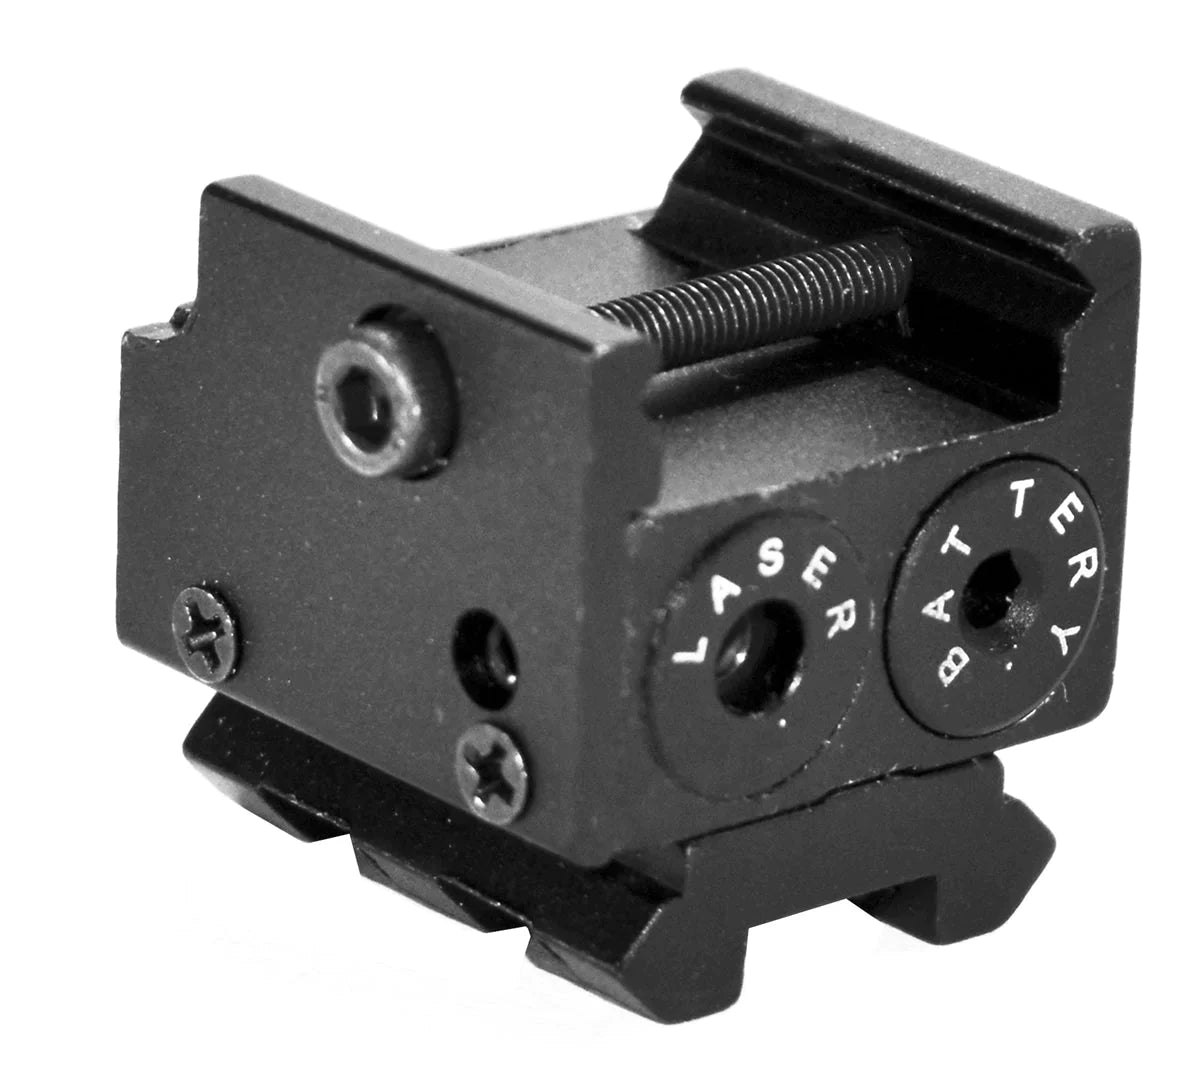 Trinity Compact red dot Sight for Ruger sr22 Models Tactical Optics Home Defense Accessory Picatinny Weaver Mount Adapter Aluminum Black. - TRINITY SUPPLY INC